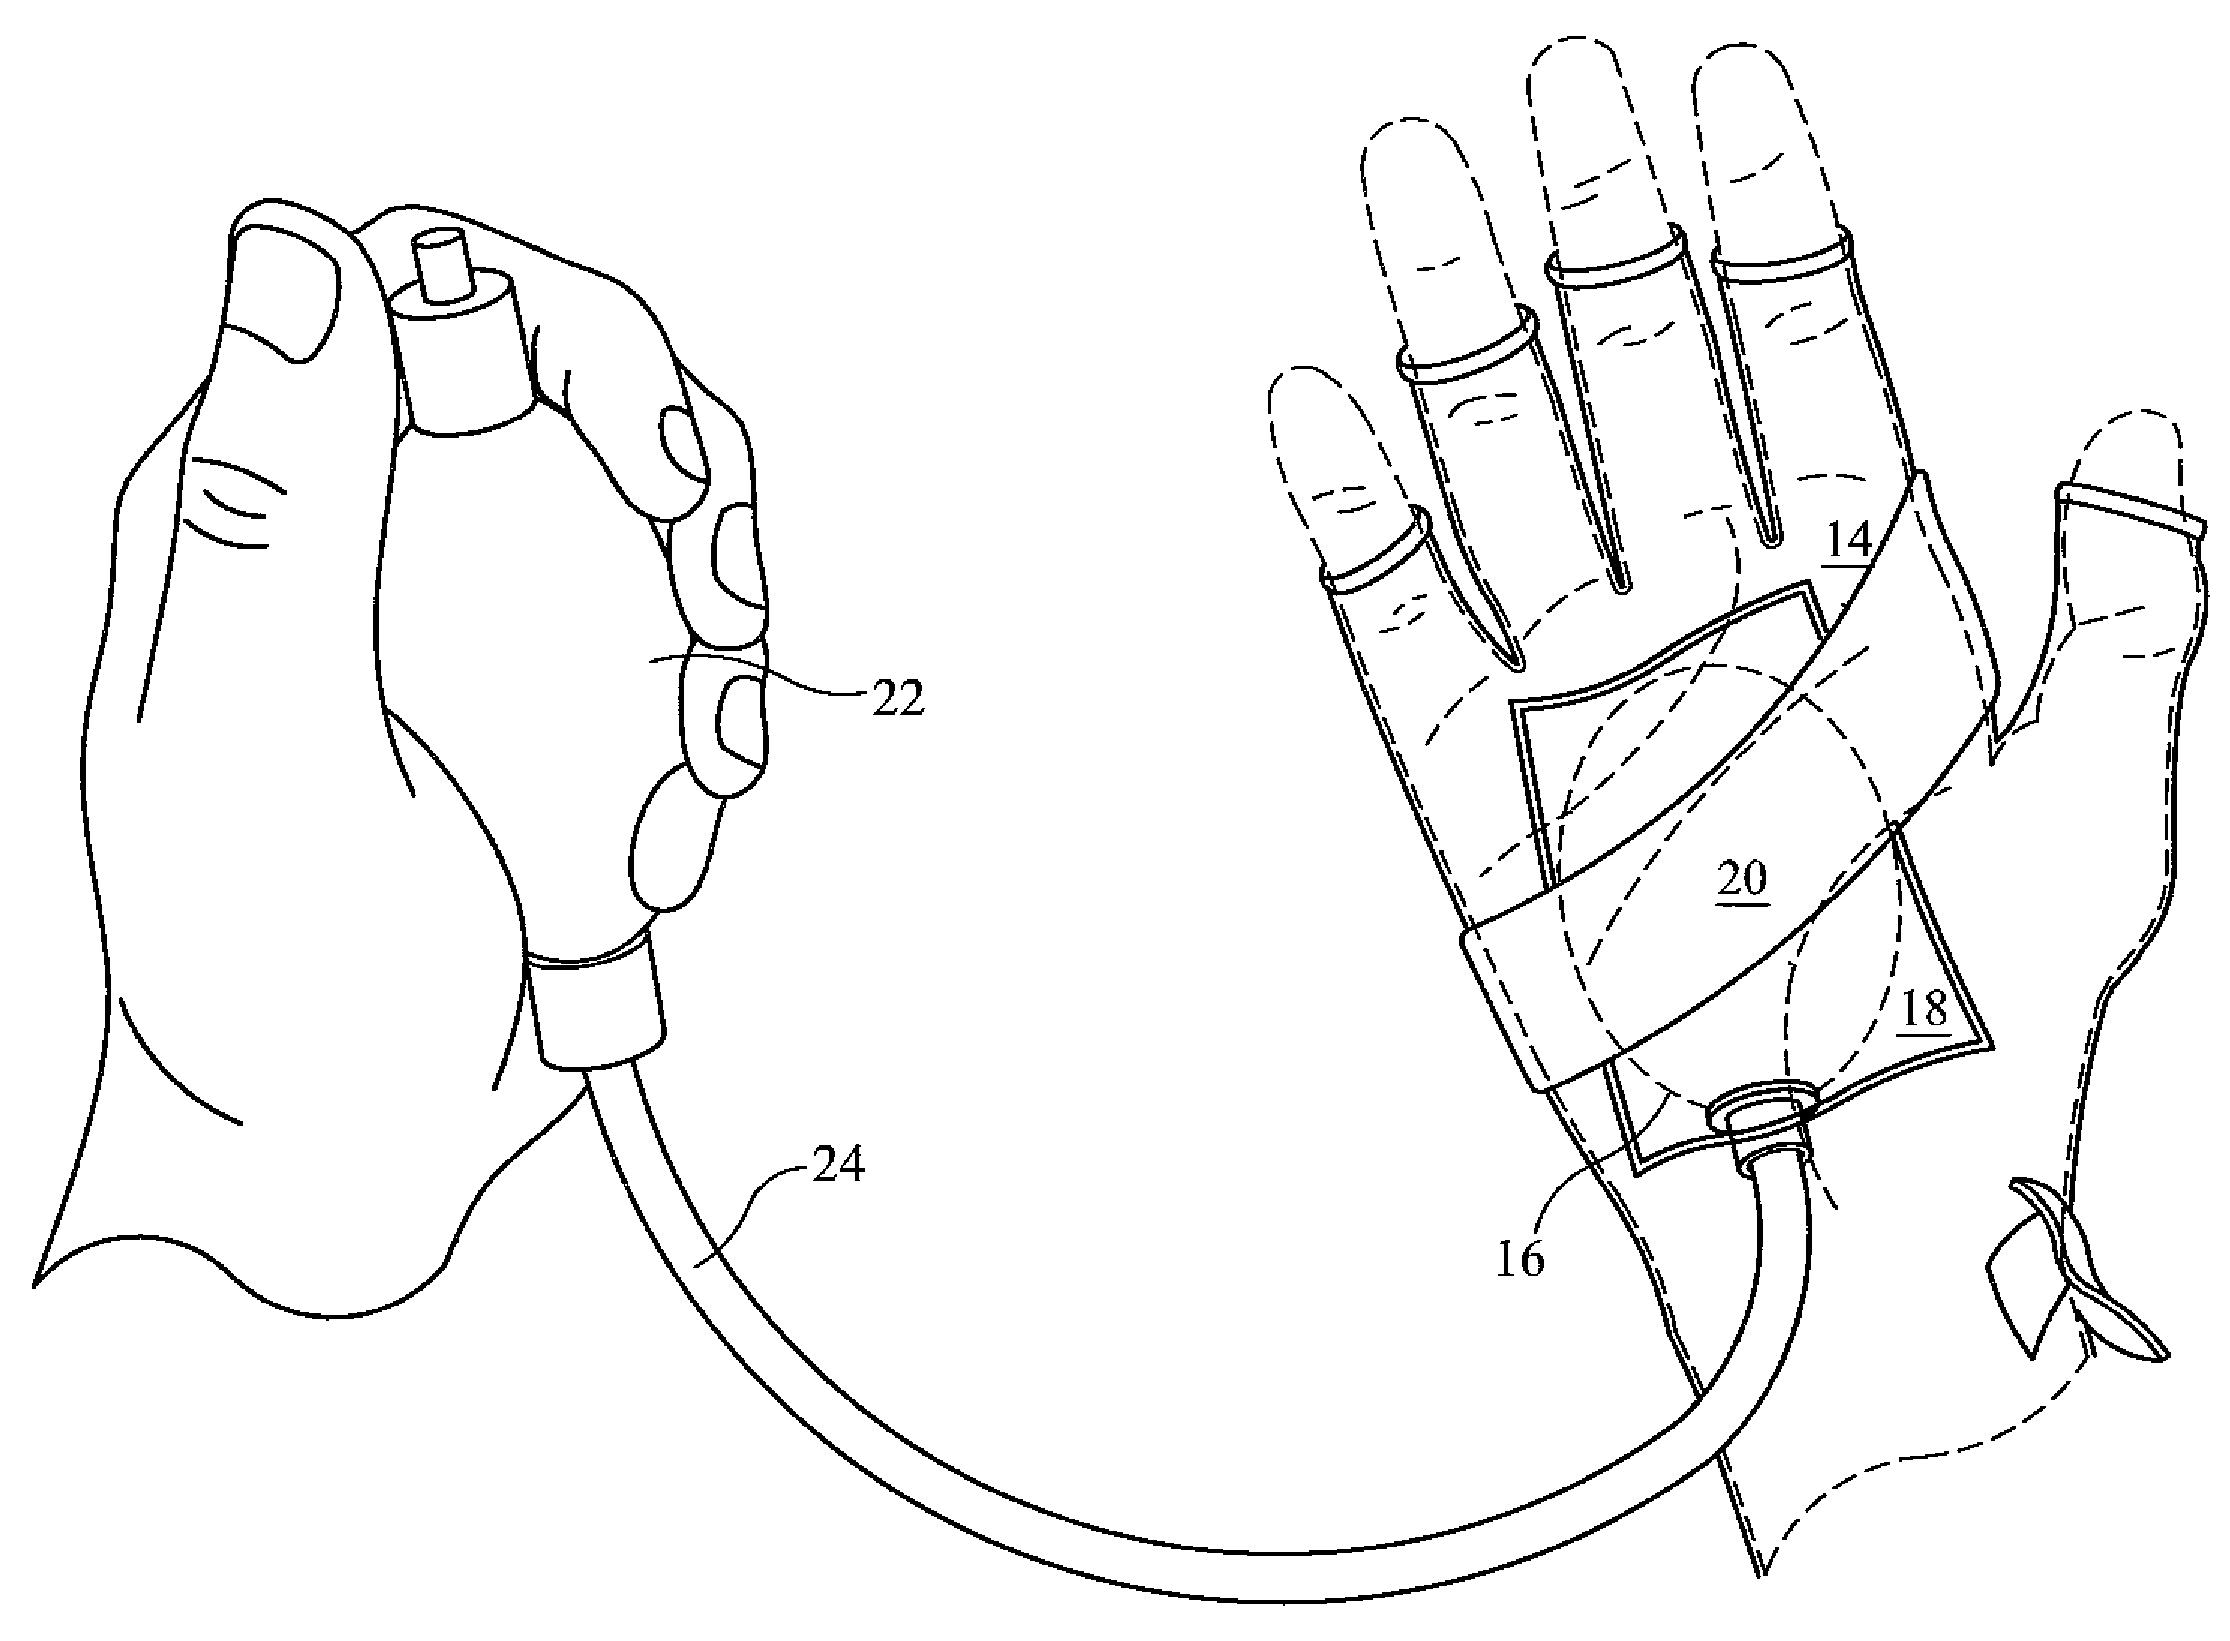 Acupressure magnetic therapy glove